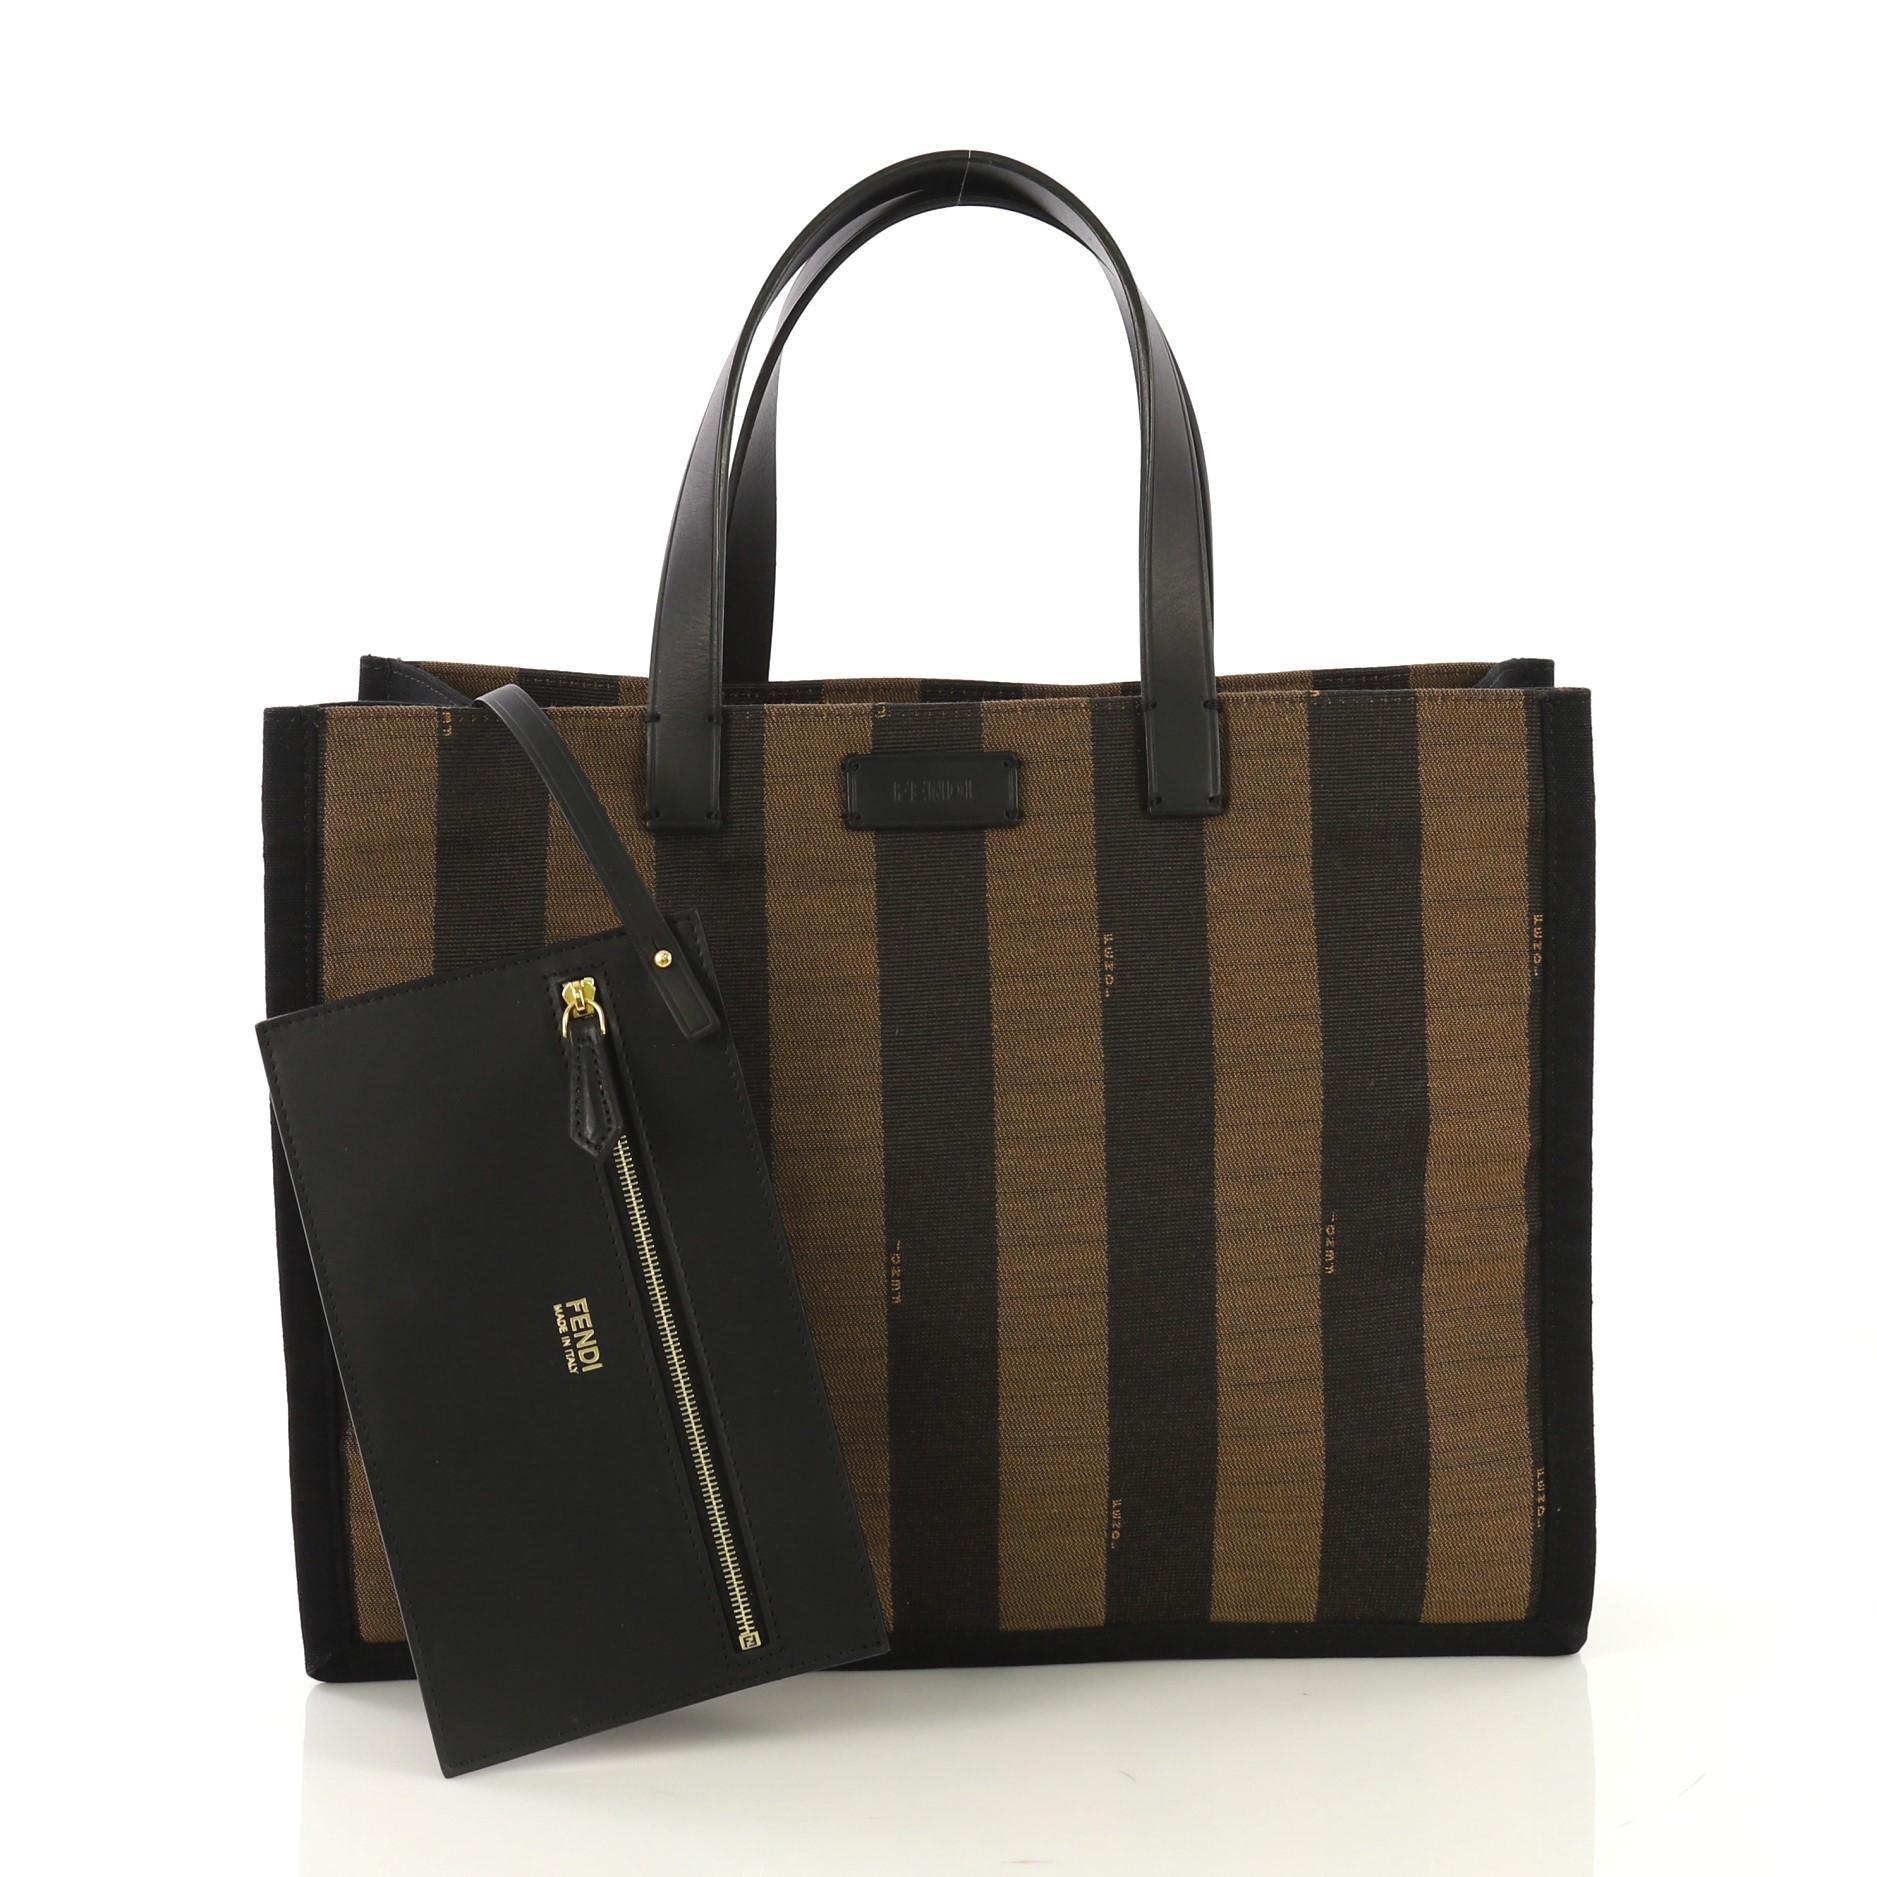 This Fendi Pequin Shopping Tote Canvas Medium, crafted in back and brown canvas, features dual flat leather straps and gold-tone hardware. It opens to a brown fabric interior. 

Estimated Retail Price: $1,400
Condition: Excellent. Minor wear on base